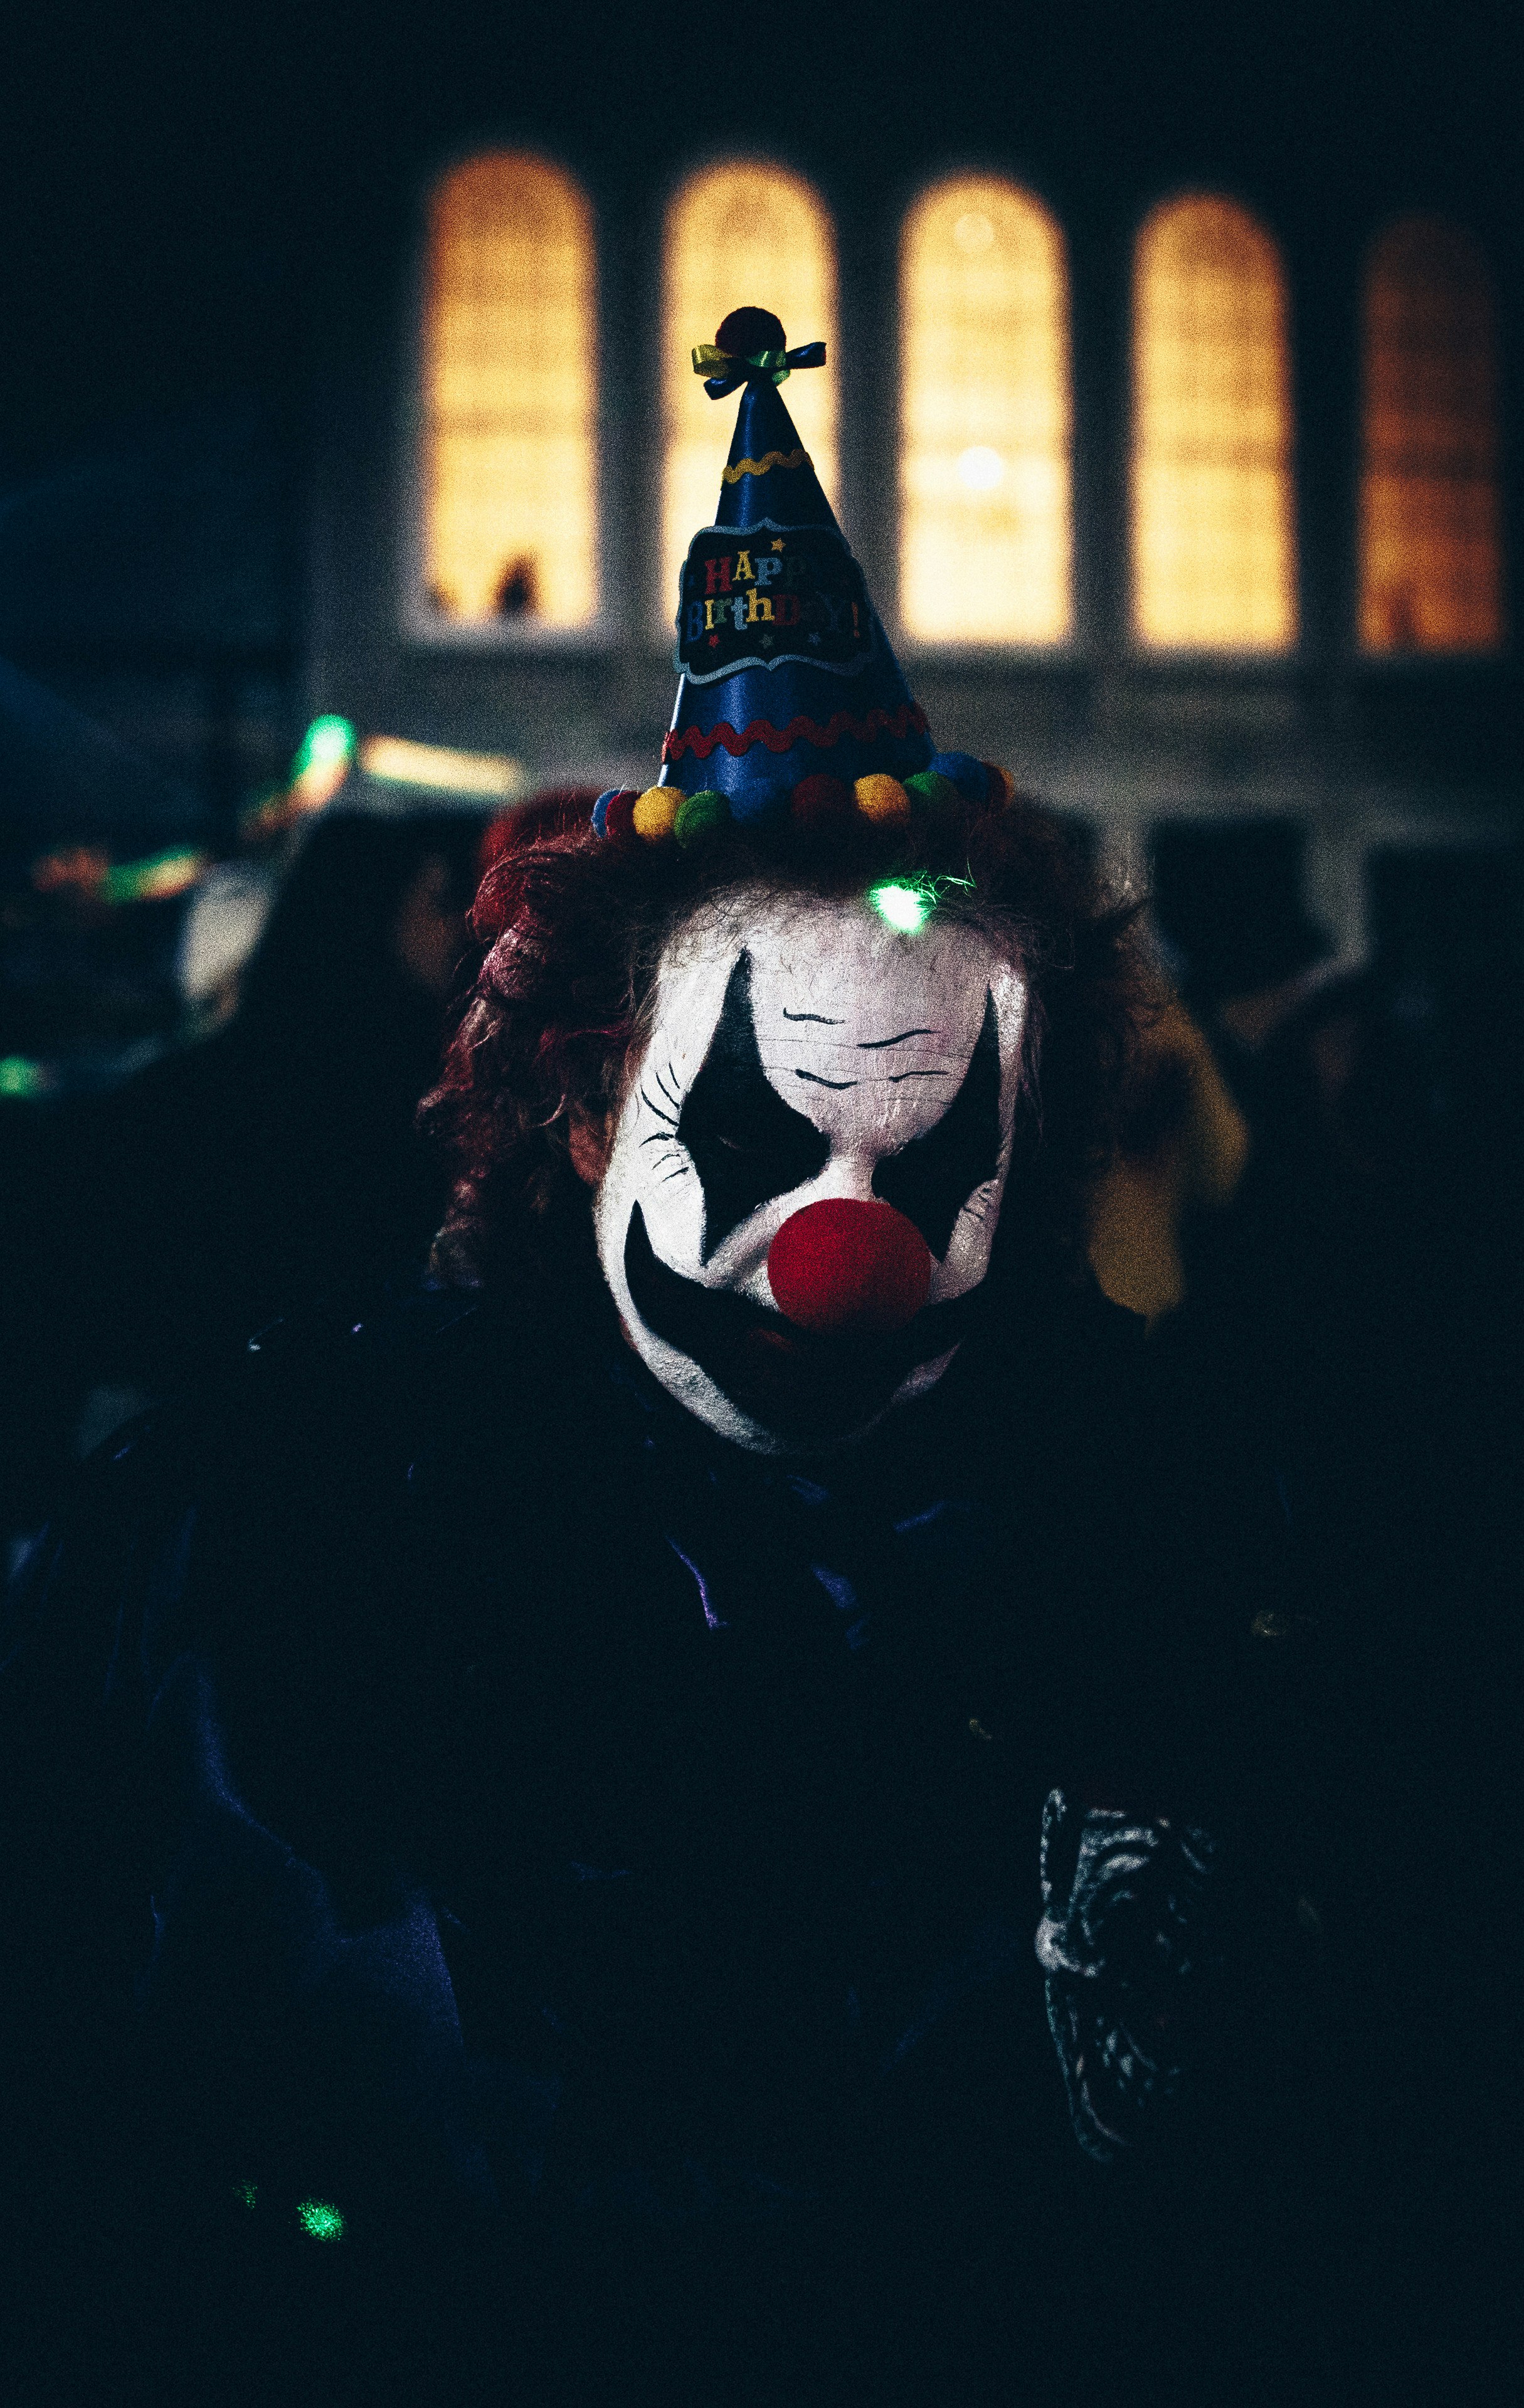 person wearing multicolored cone party hat and clown mask